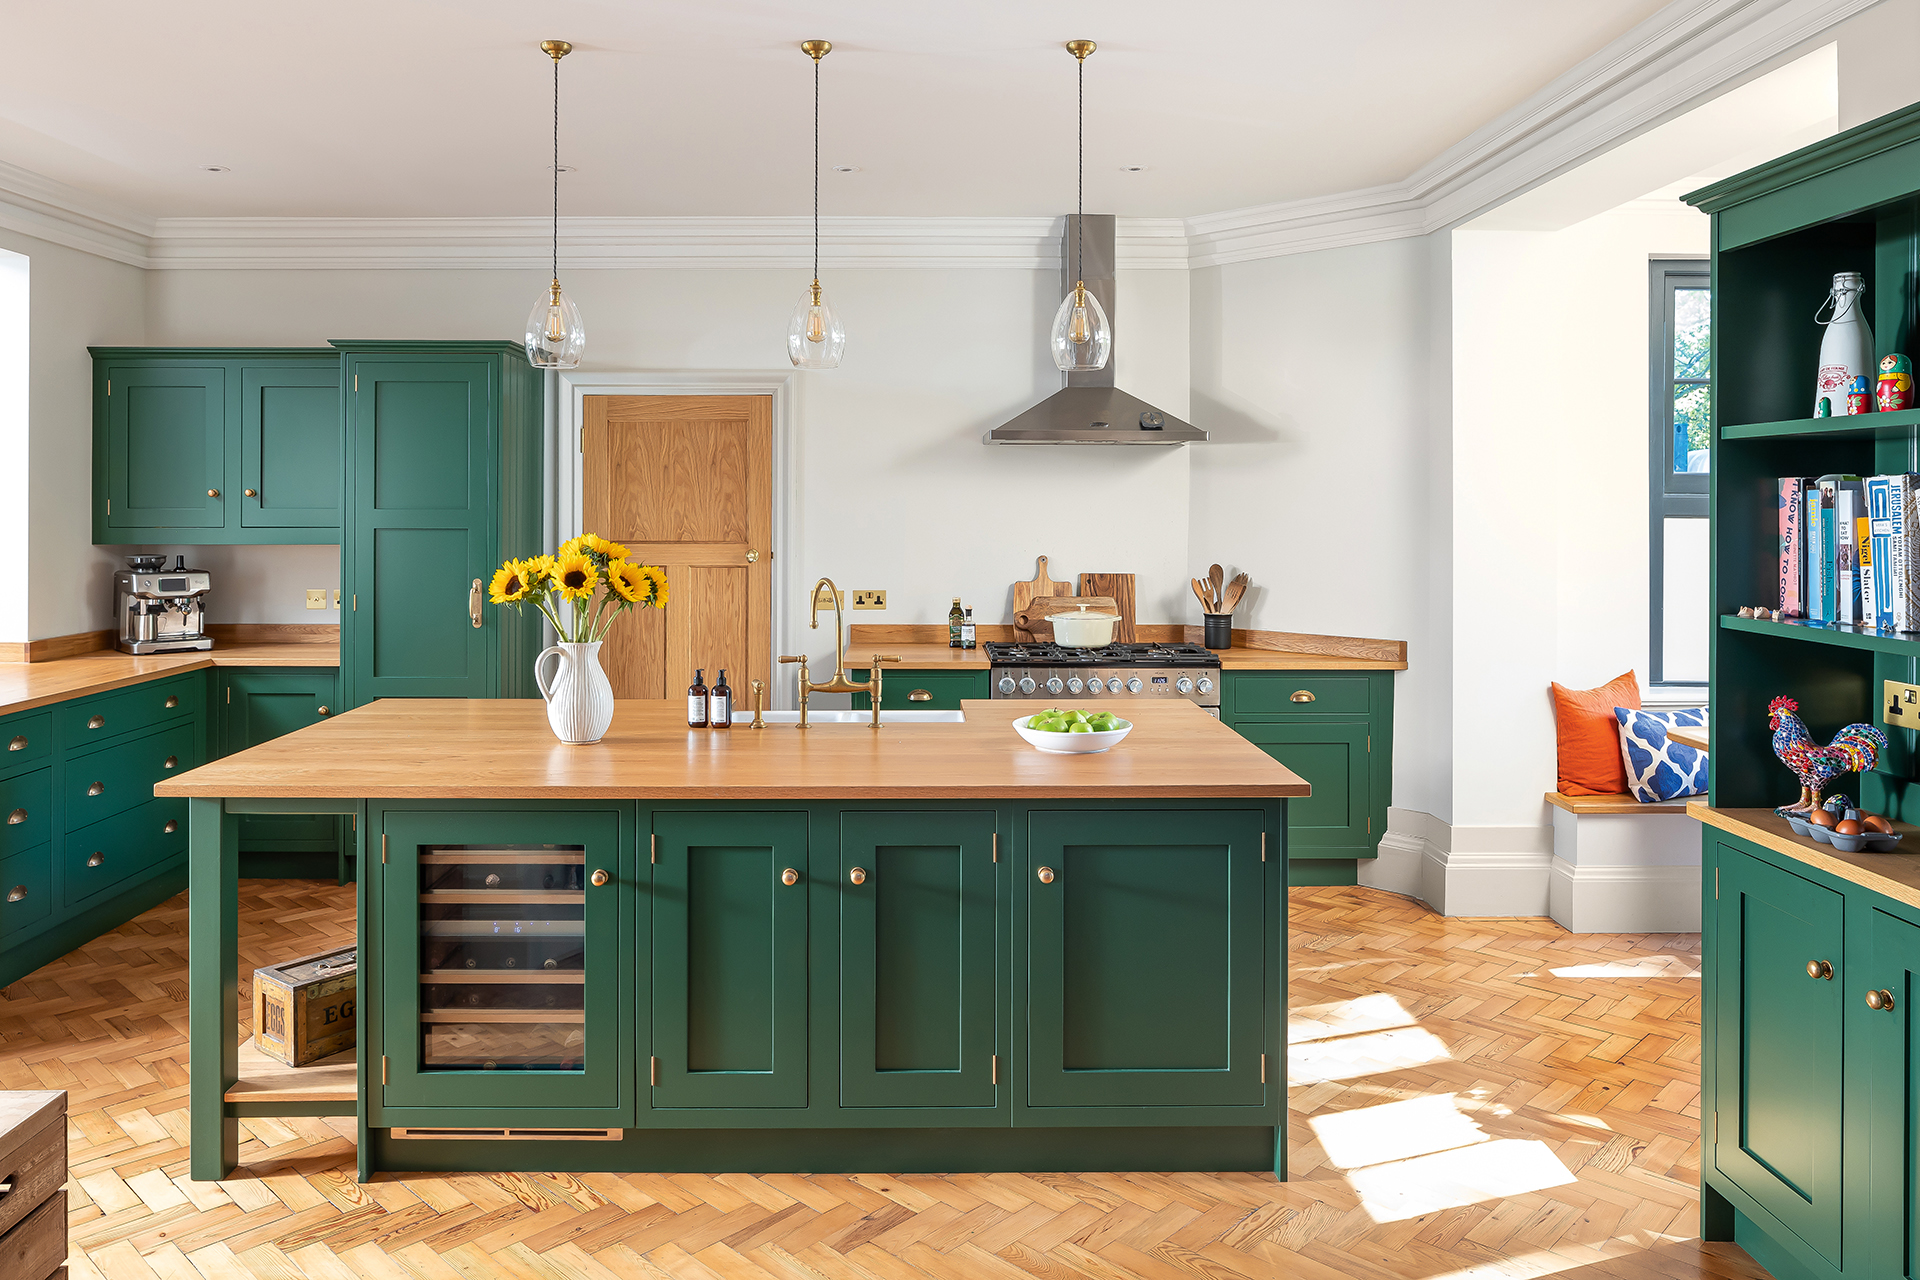 A large white kitchen with wooden flooring and bottle green painted kitchen cabinets and island.